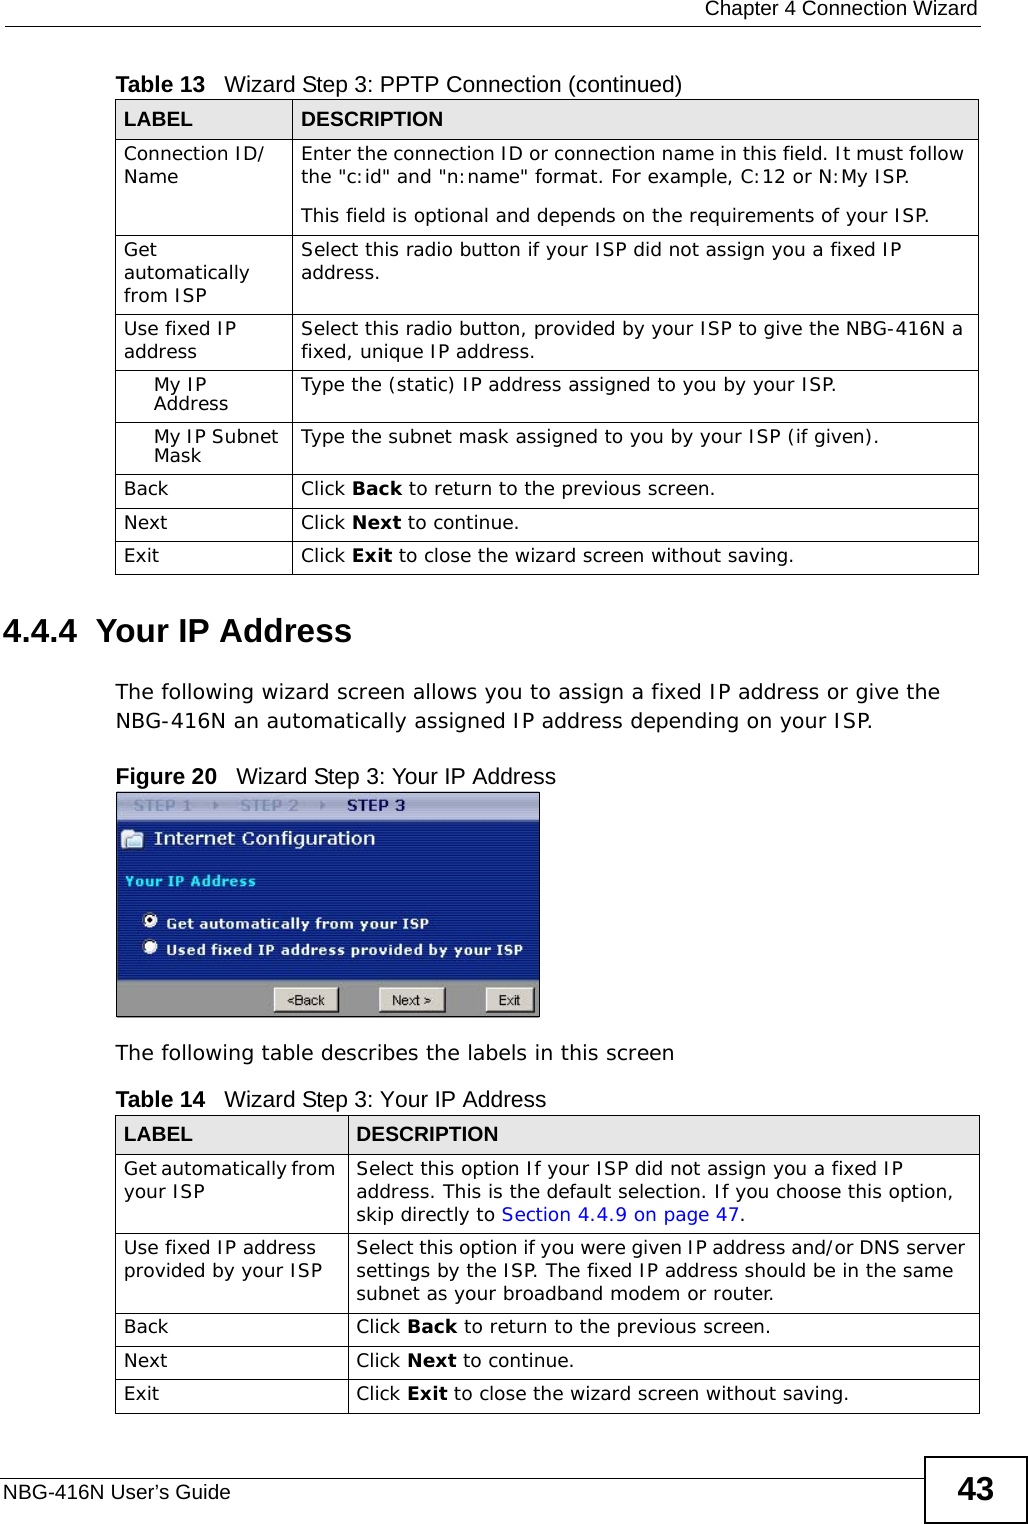  Chapter 4 Connection WizardNBG-416N User’s Guide 434.4.4  Your IP AddressThe following wizard screen allows you to assign a fixed IP address or give the NBG-416N an automatically assigned IP address depending on your ISP.Figure 20   Wizard Step 3: Your IP AddressThe following table describes the labels in this screenConnection ID/Name Enter the connection ID or connection name in this field. It must follow the &quot;c:id&quot; and &quot;n:name&quot; format. For example, C:12 or N:My ISP.This field is optional and depends on the requirements of your ISP.Get automatically from ISPSelect this radio button if your ISP did not assign you a fixed IP address.Use fixed IP address Select this radio button, provided by your ISP to give the NBG-416N a fixed, unique IP address.My IP Address Type the (static) IP address assigned to you by your ISP.My IP Subnet Mask Type the subnet mask assigned to you by your ISP (if given).Back Click Back to return to the previous screen.Next Click Next to continue. Exit Click Exit to close the wizard screen without saving.Table 13   Wizard Step 3: PPTP Connection (continued)LABEL DESCRIPTIONTable 14   Wizard Step 3: Your IP AddressLABEL DESCRIPTIONGet automatically from your ISP  Select this option If your ISP did not assign you a fixed IP address. This is the default selection. If you choose this option, skip directly to Section 4.4.9 on page 47.Use fixed IP address provided by your ISP Select this option if you were given IP address and/or DNS server settings by the ISP. The fixed IP address should be in the same subnet as your broadband modem or router. Back Click Back to return to the previous screen.Next Click Next to continue. Exit Click Exit to close the wizard screen without saving.